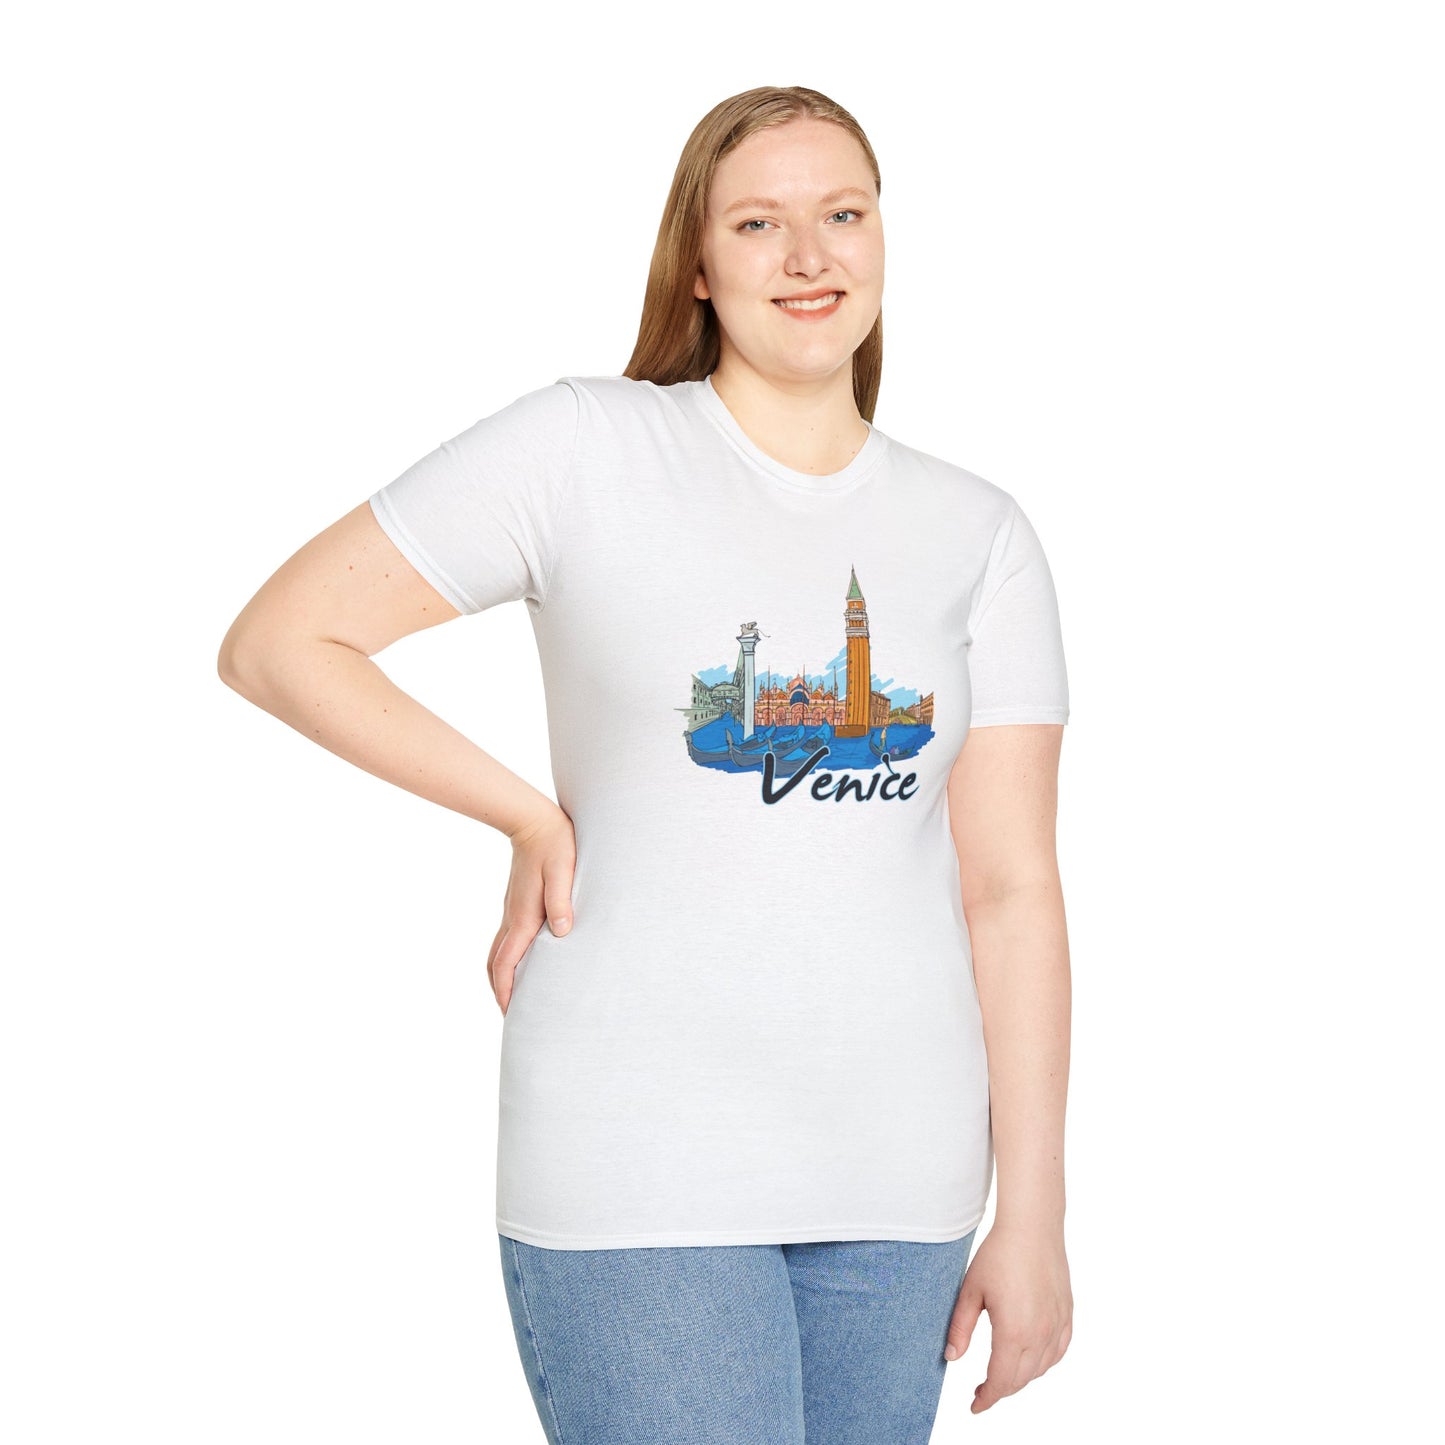 Discover Serenity with Our Venice-Inspired T-Shirt